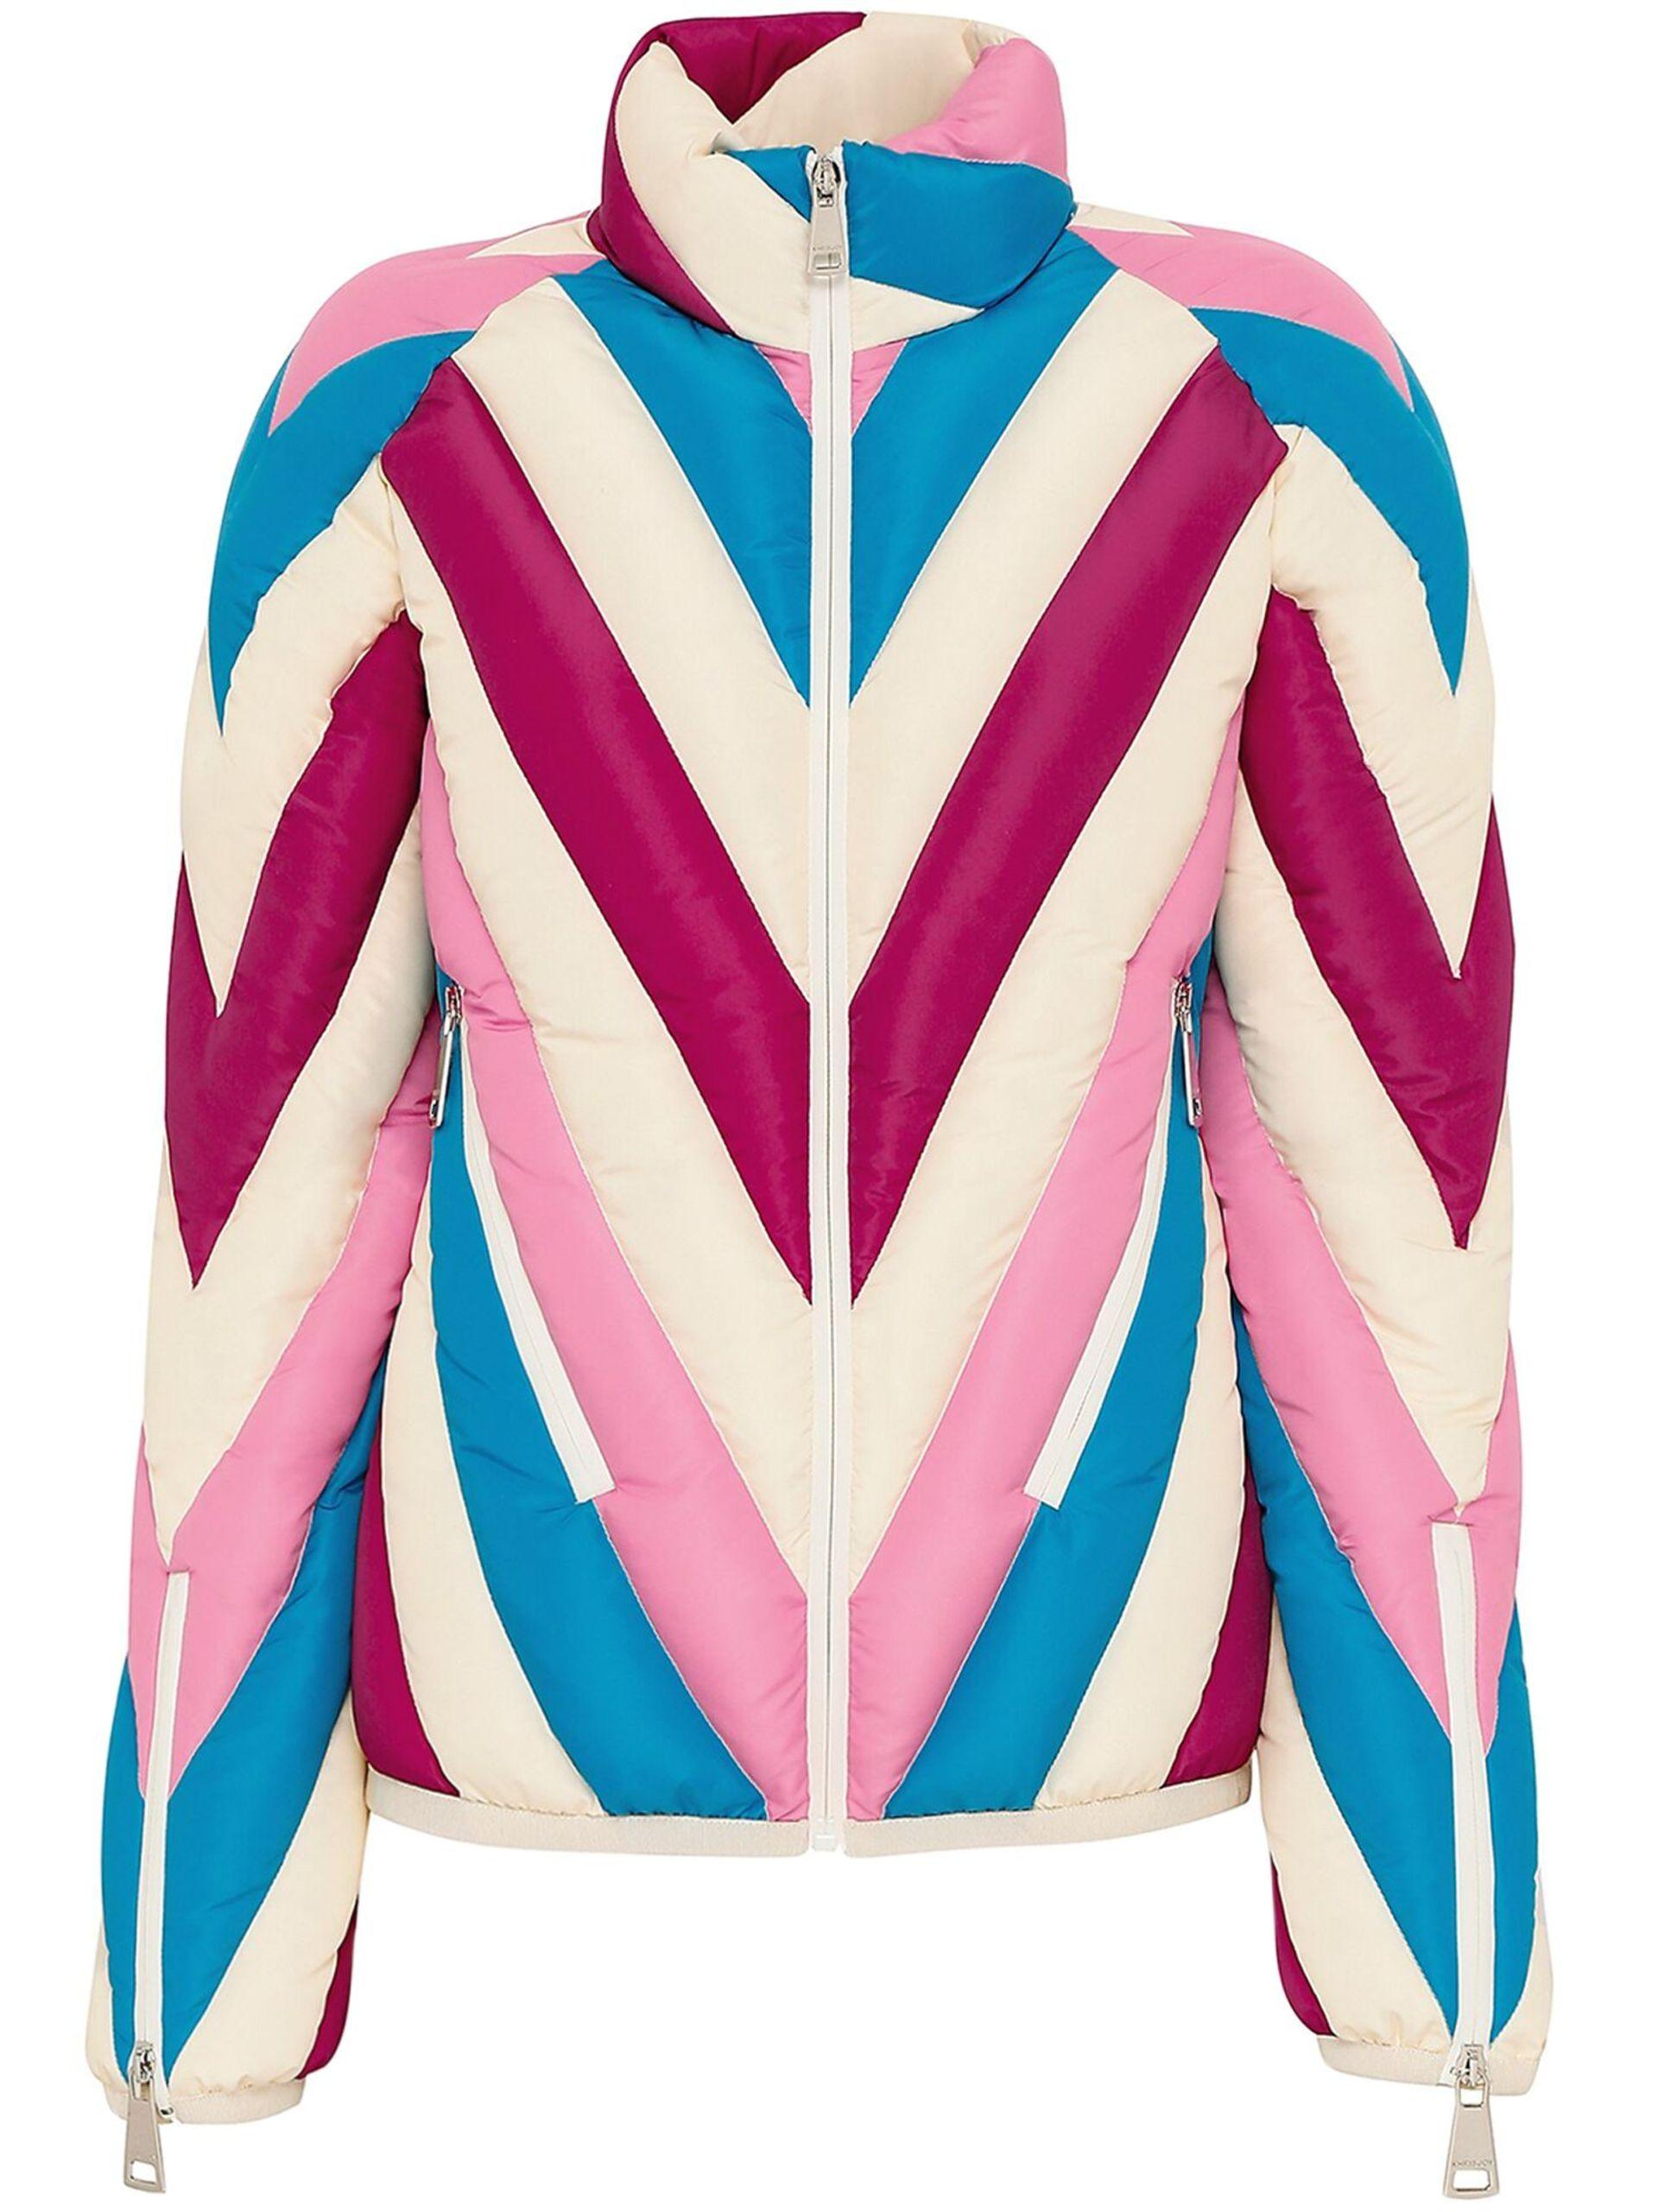 Khrisjoy Chevron-quilted Padded Ski Jacket in Blue